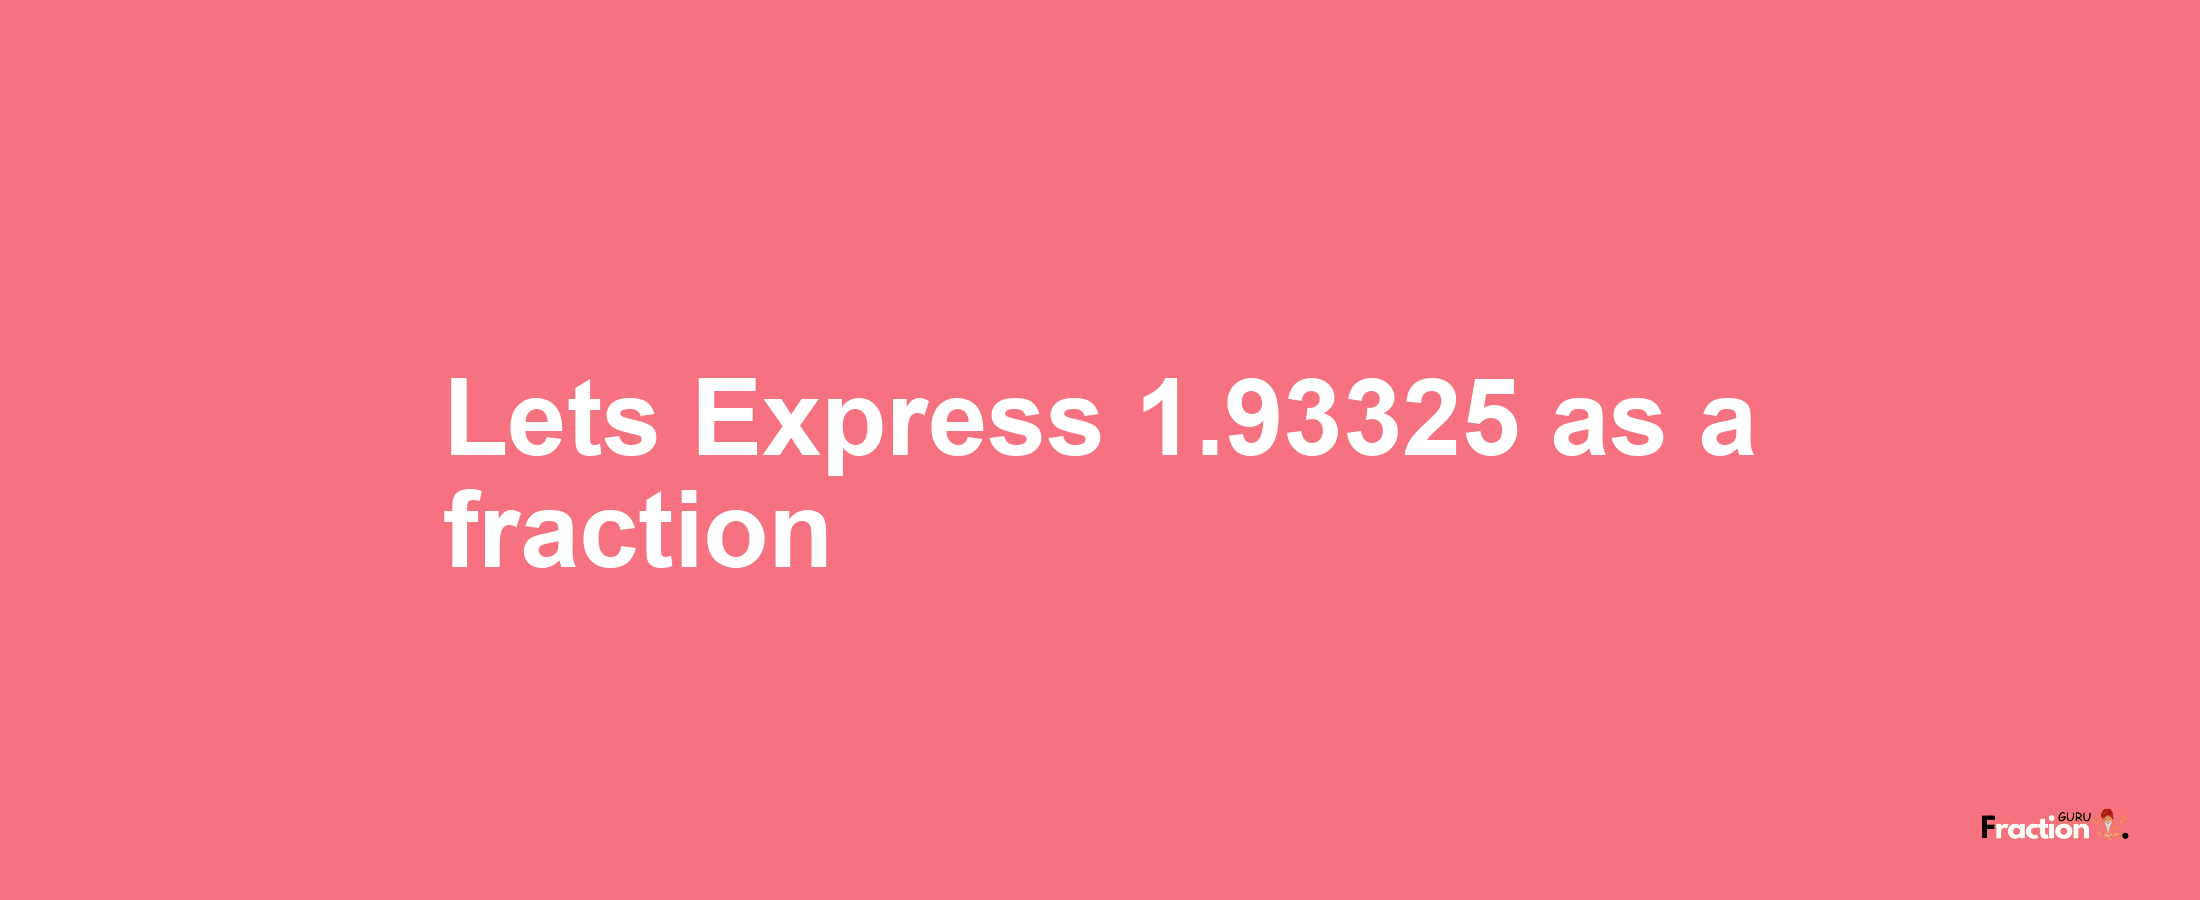 Lets Express 1.93325 as afraction